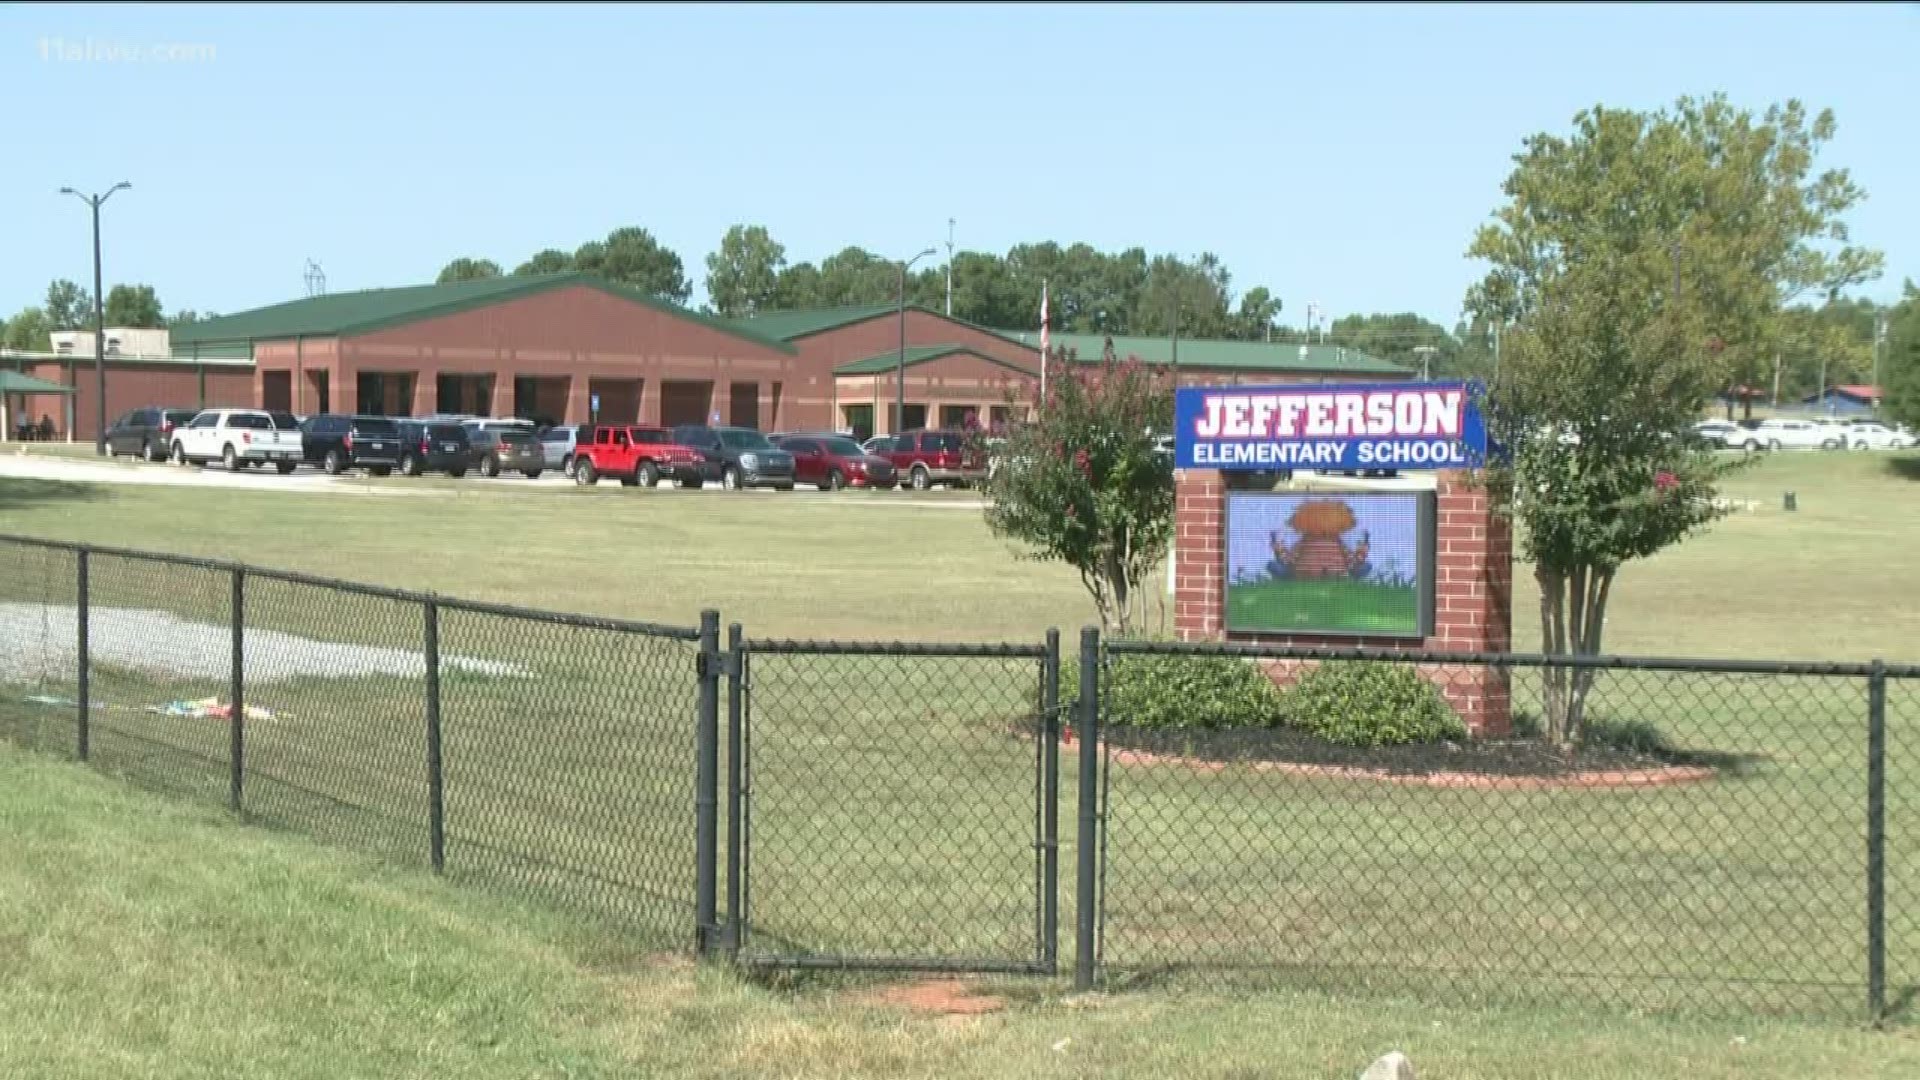 The incident, which happened on Thursday, was confirmed by Jefferson City Schools Superintendent Dr. John Jackson.